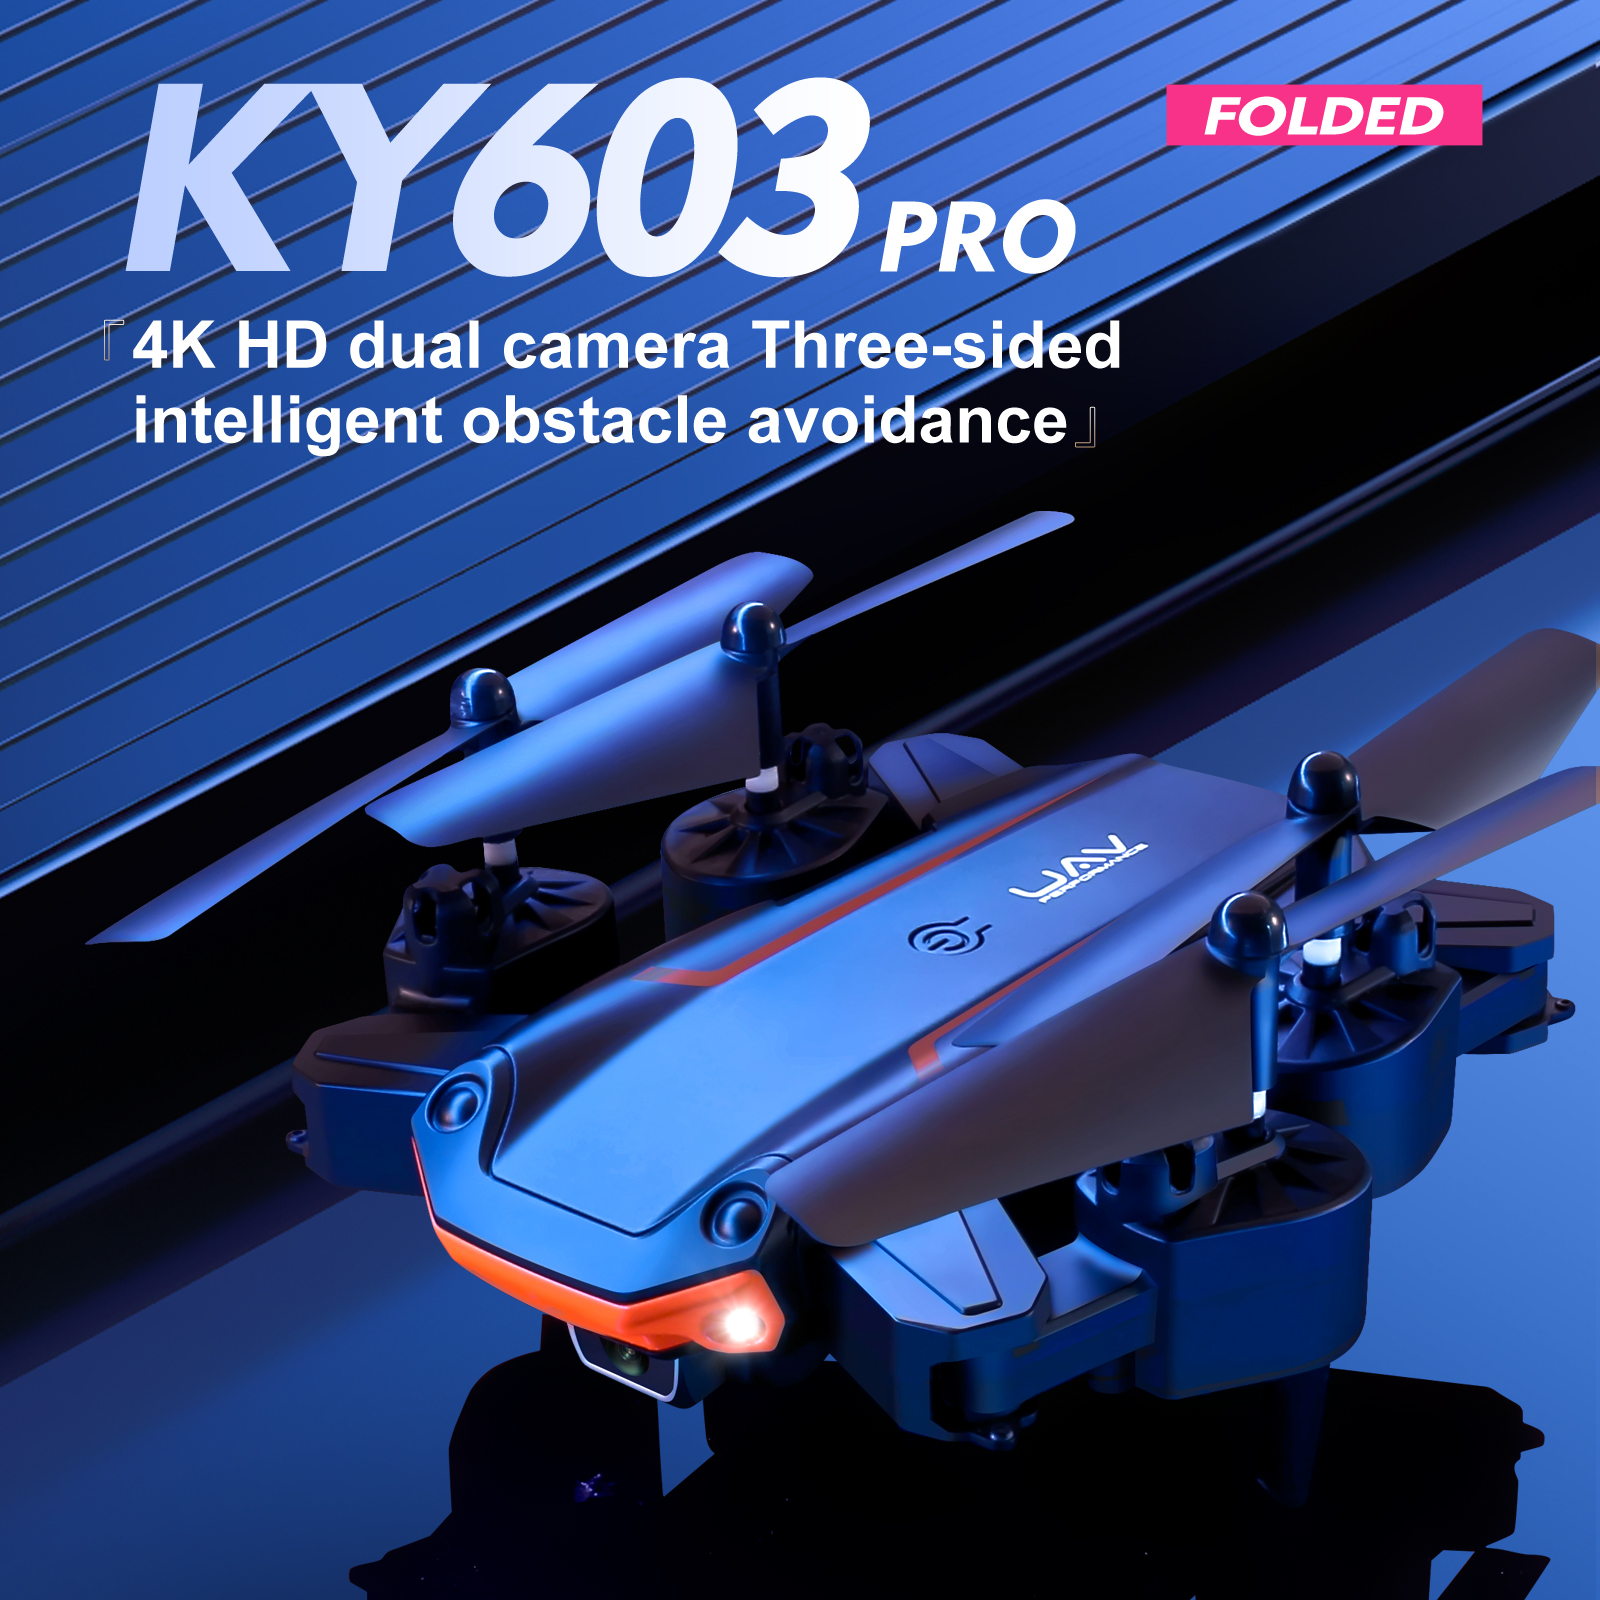 NEW Mini Drone 4K HD Dual Camera WiFi FPV Foldable Obstacle Avoidance Altitude Hold Mode RC Quadcopter Toys Boys Christmas Gift